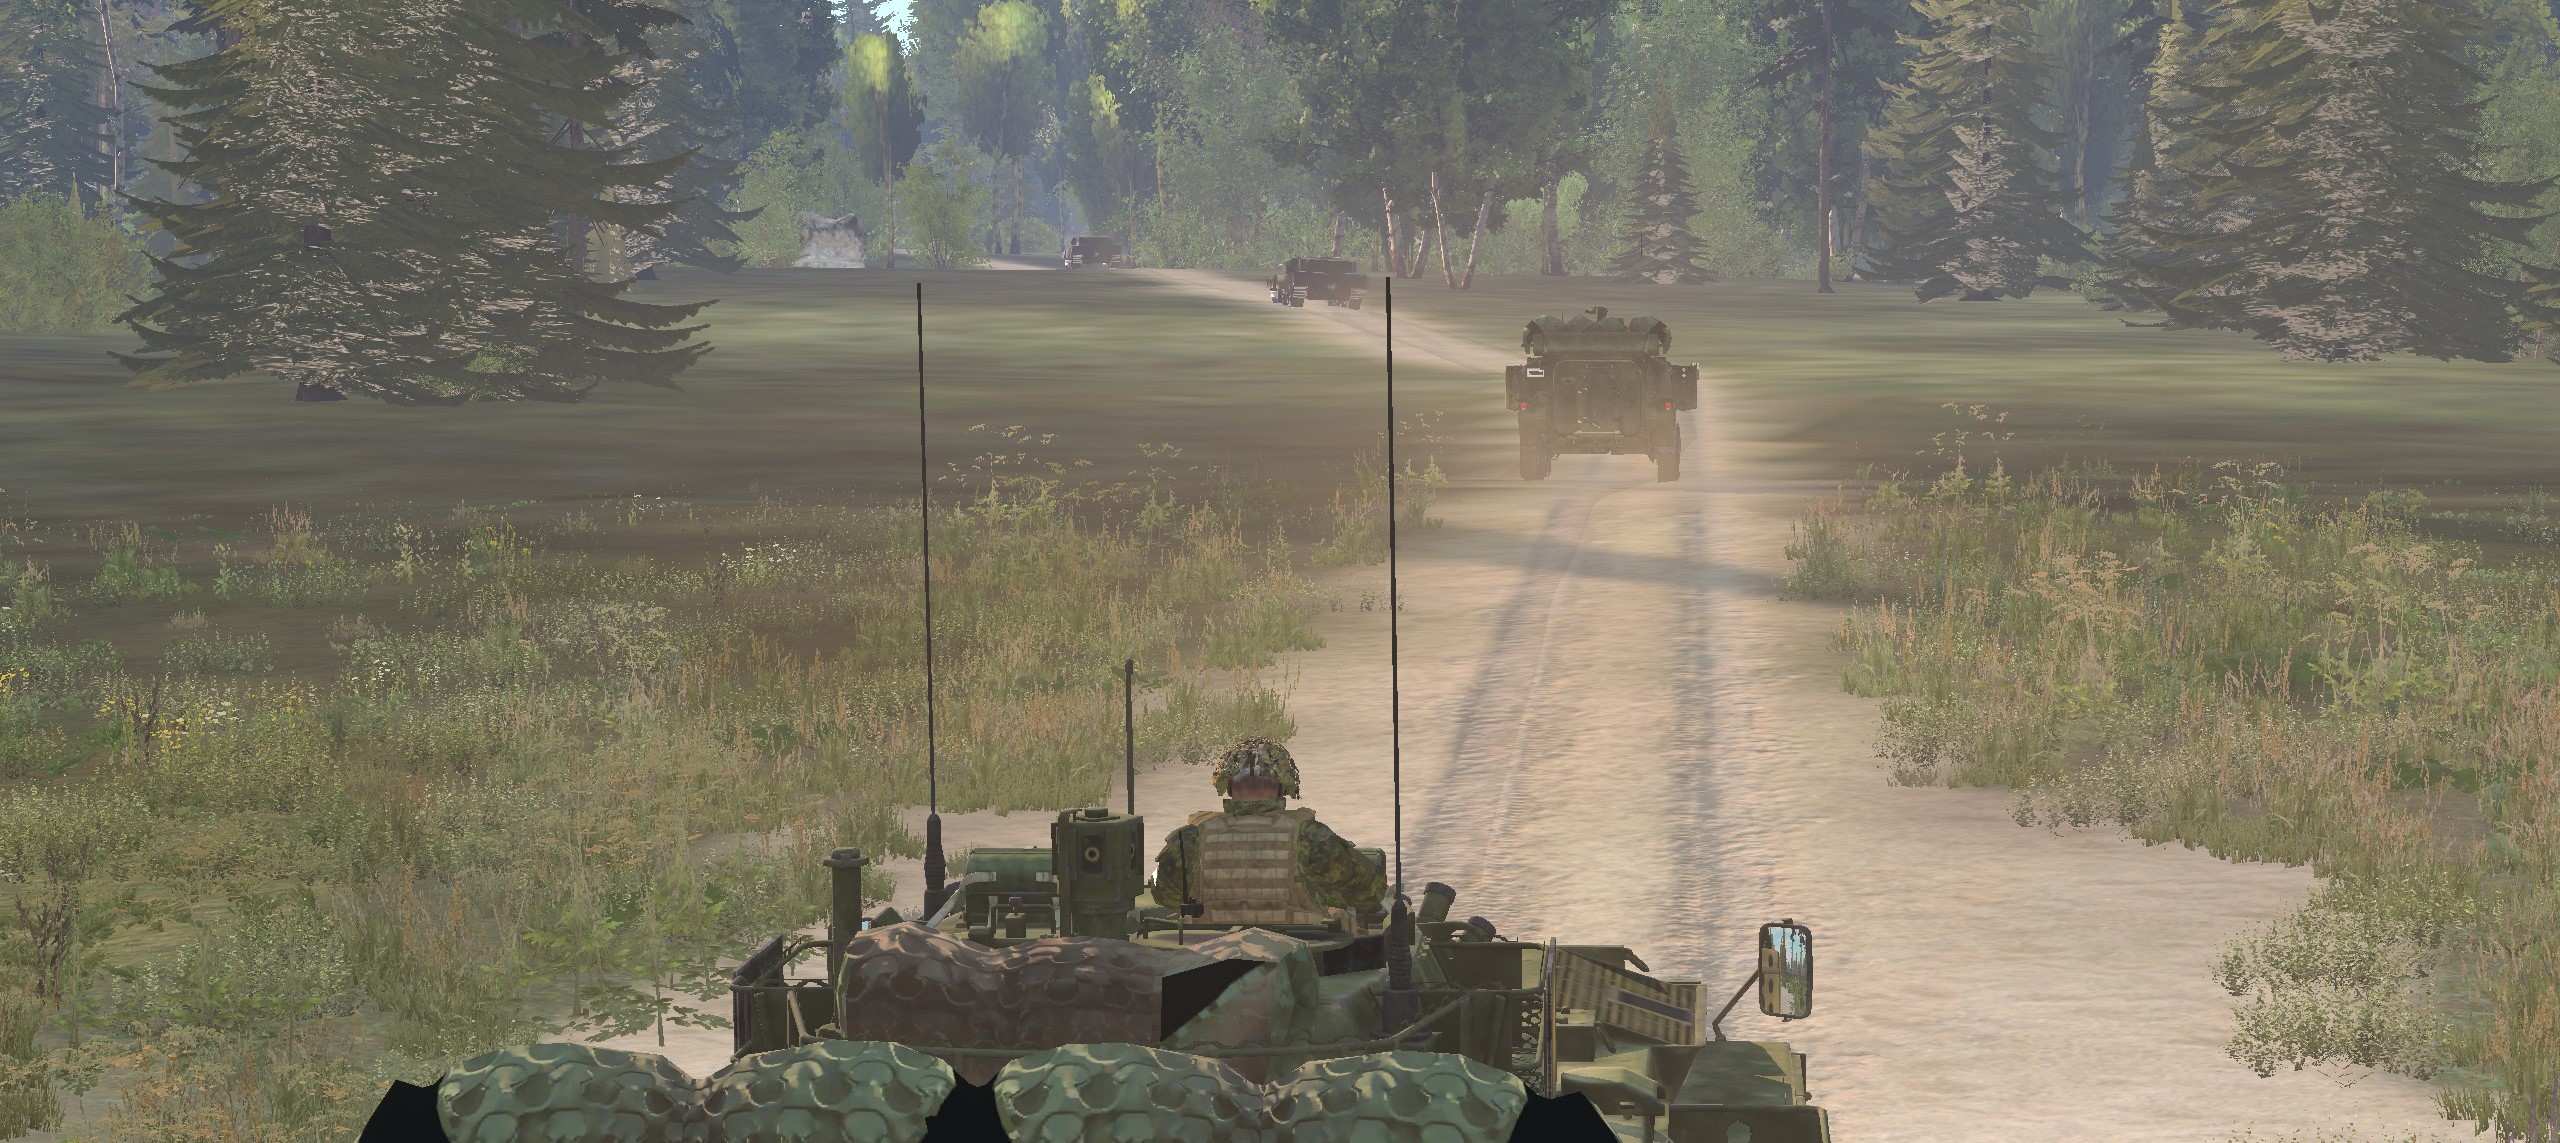 ACOY LAV 6s disembarking from the FOB (virtual Arma)